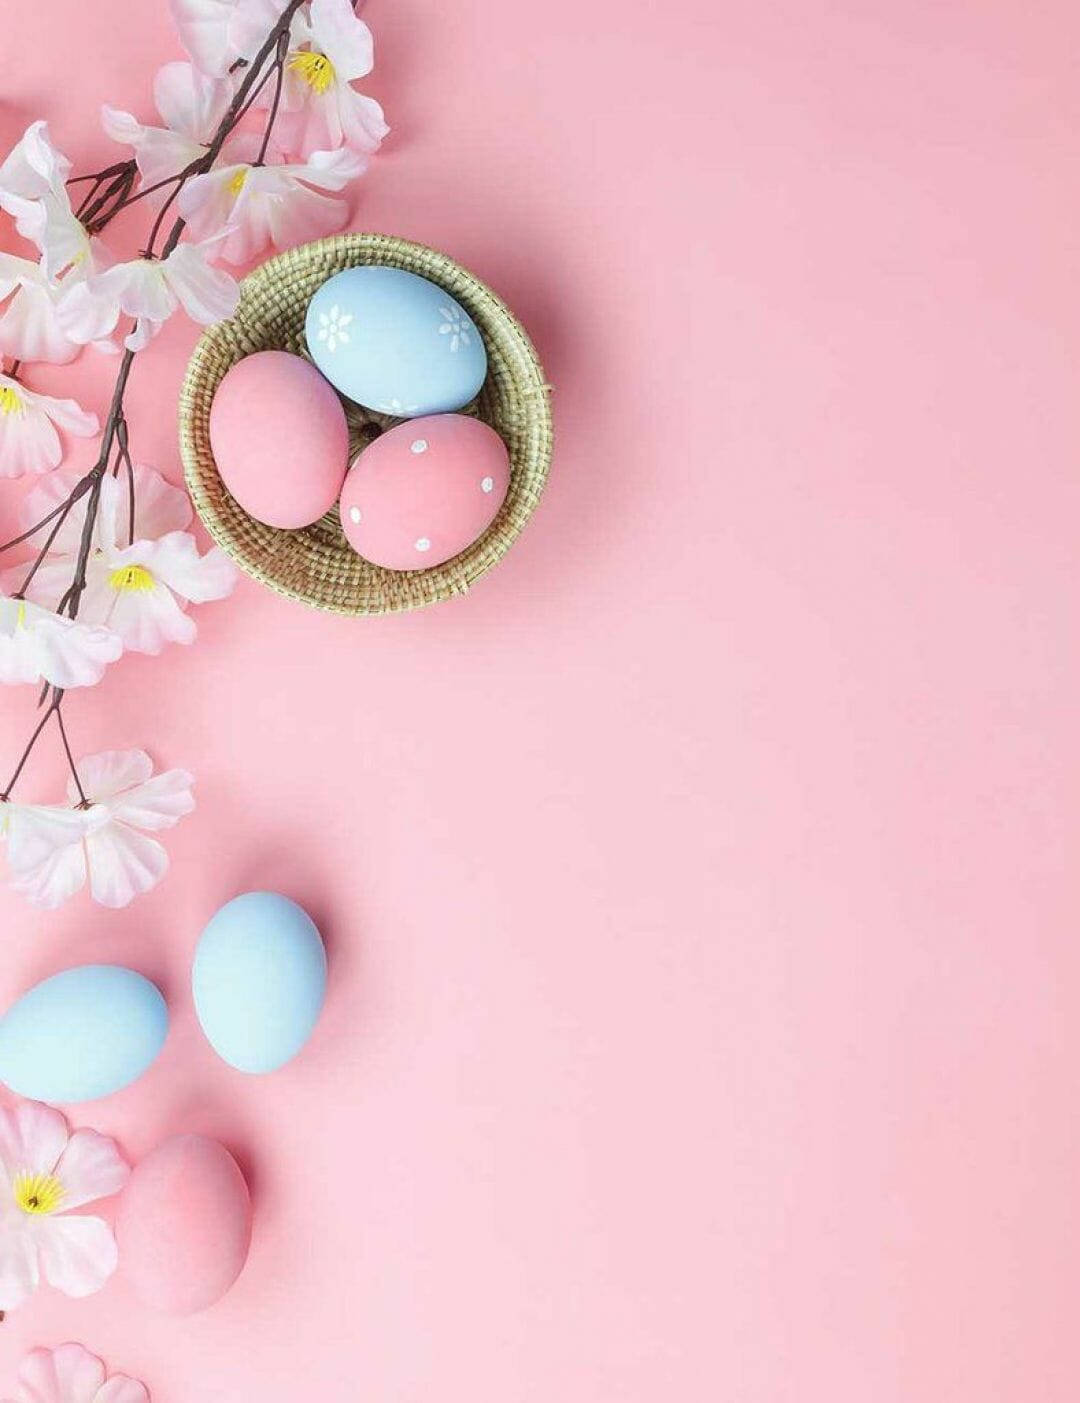 Easter Eggs On Pink Background With Cherry Blossoms Background